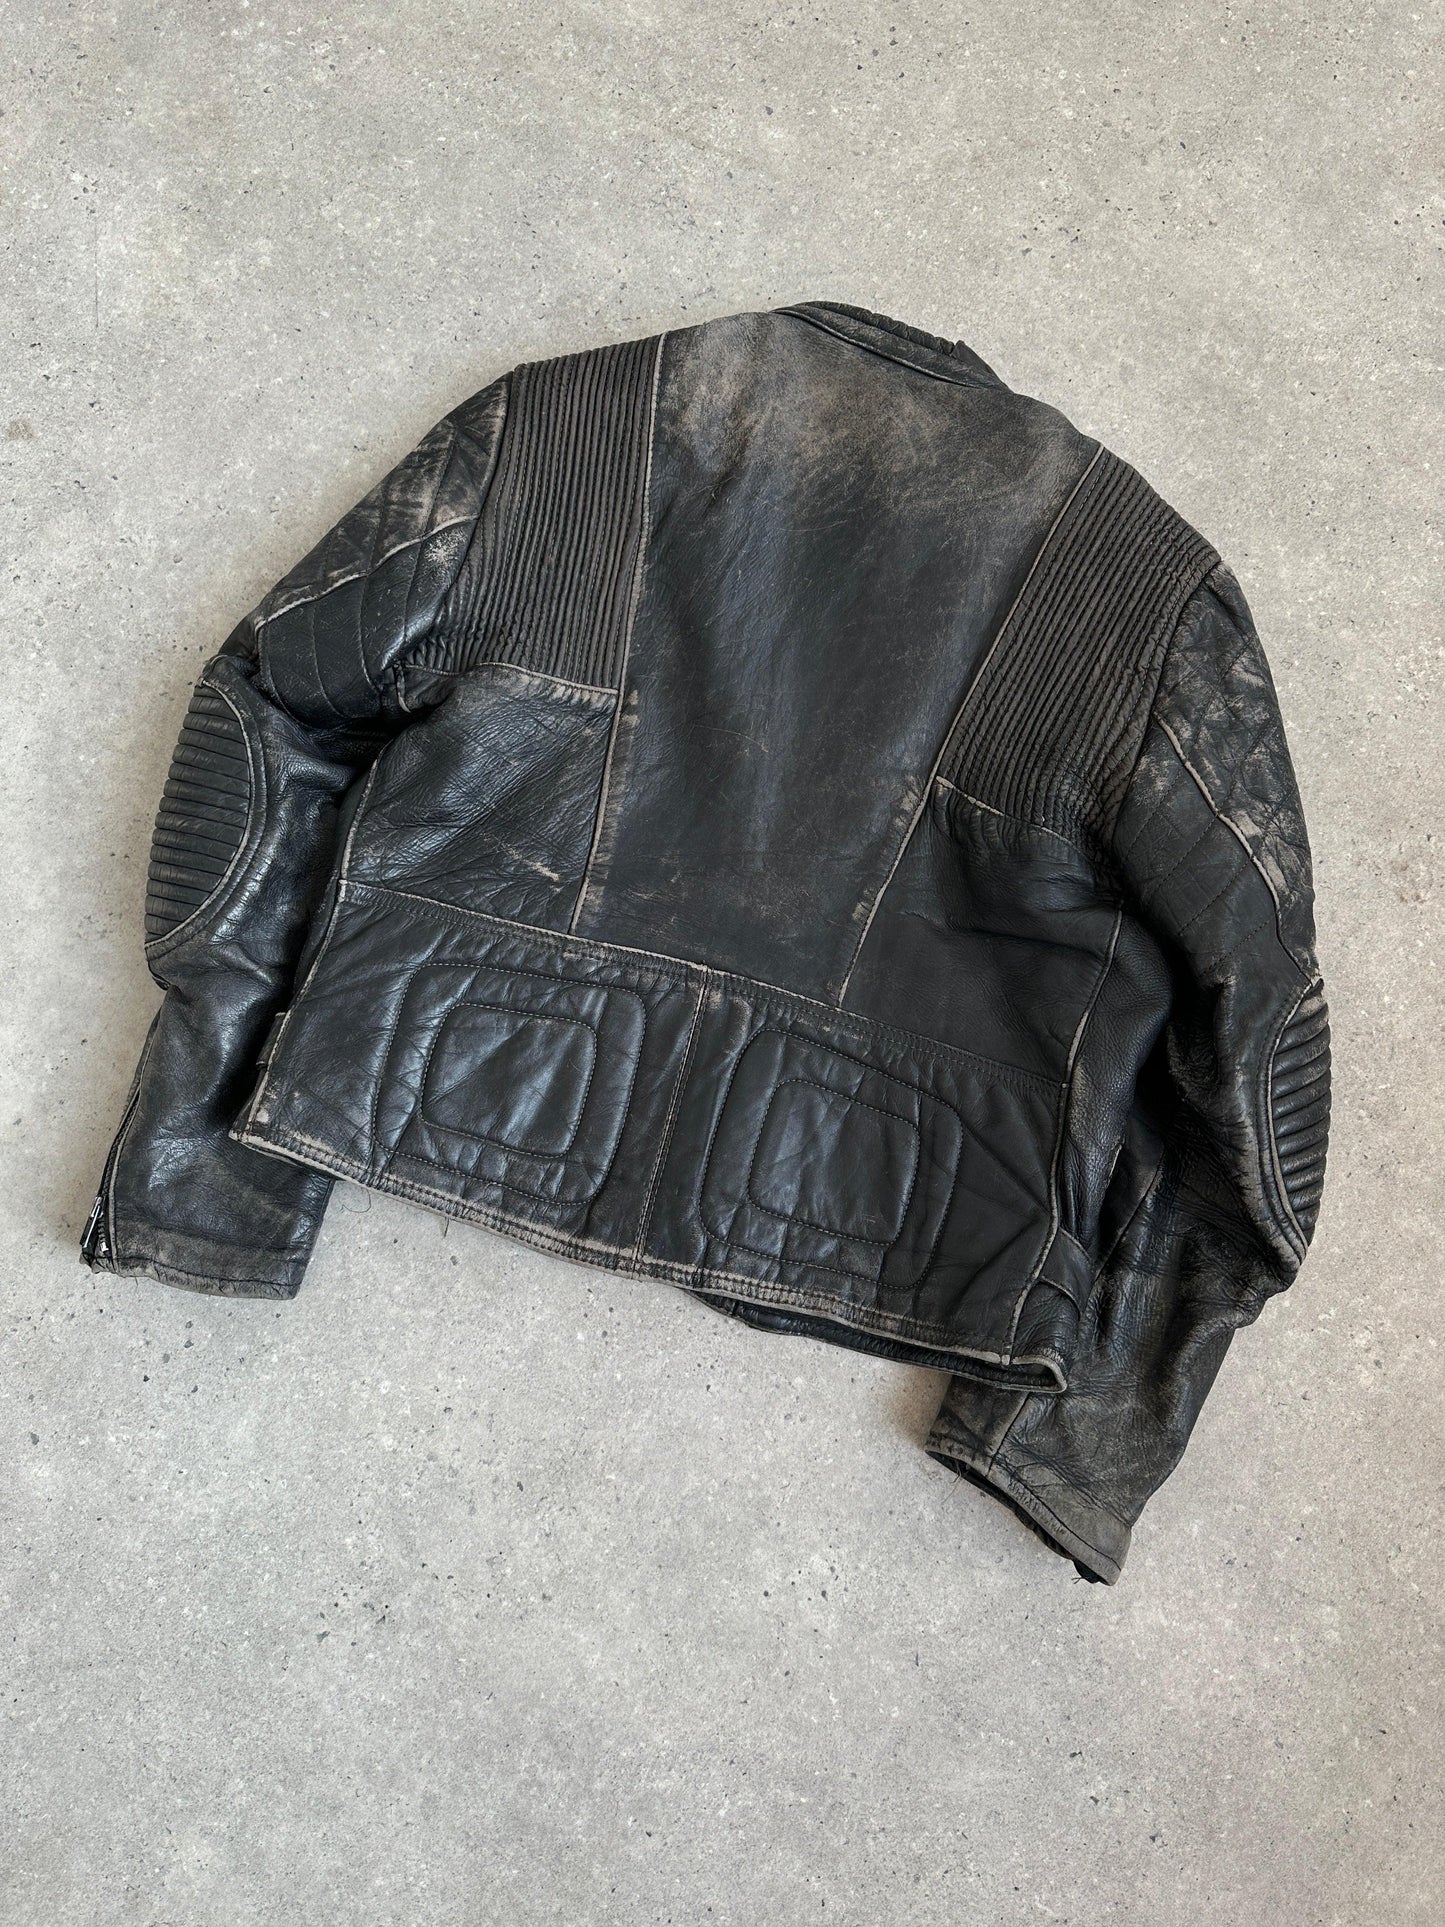 Vintage Motorcycle Distressed Leather Jacket - M/L - Known Source